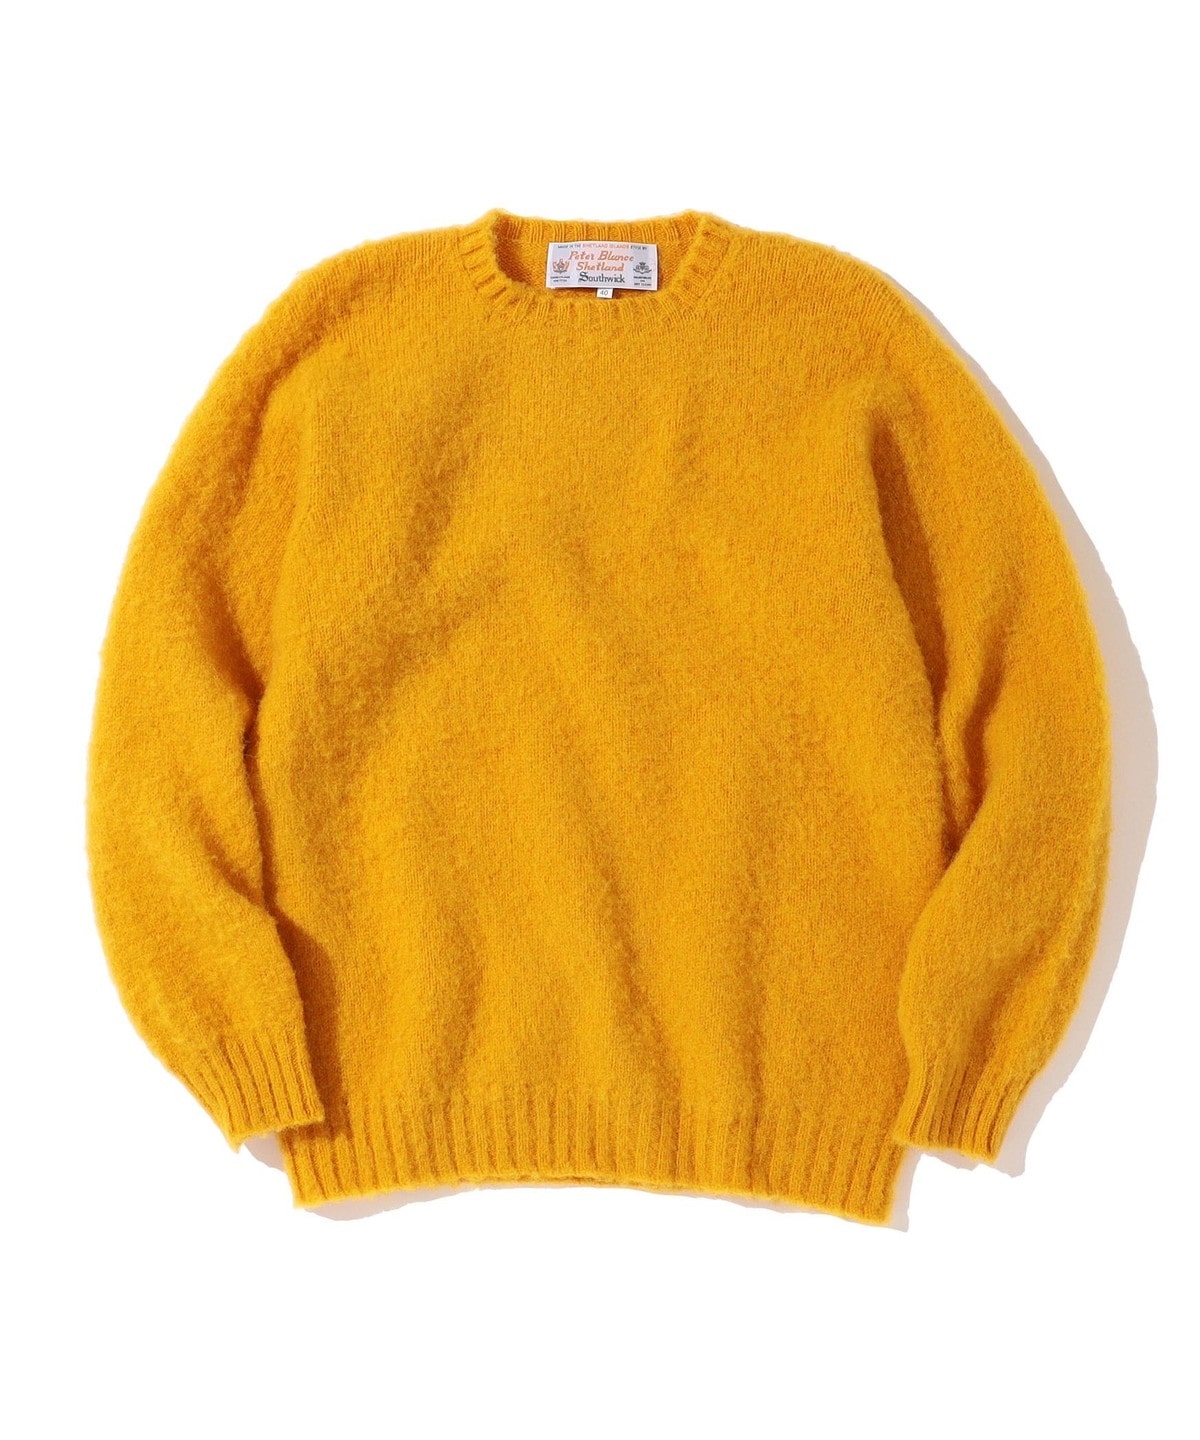 【Southwick別注】Peter Blance & Co.: Shaggy Crew Neck Pullover マスタード